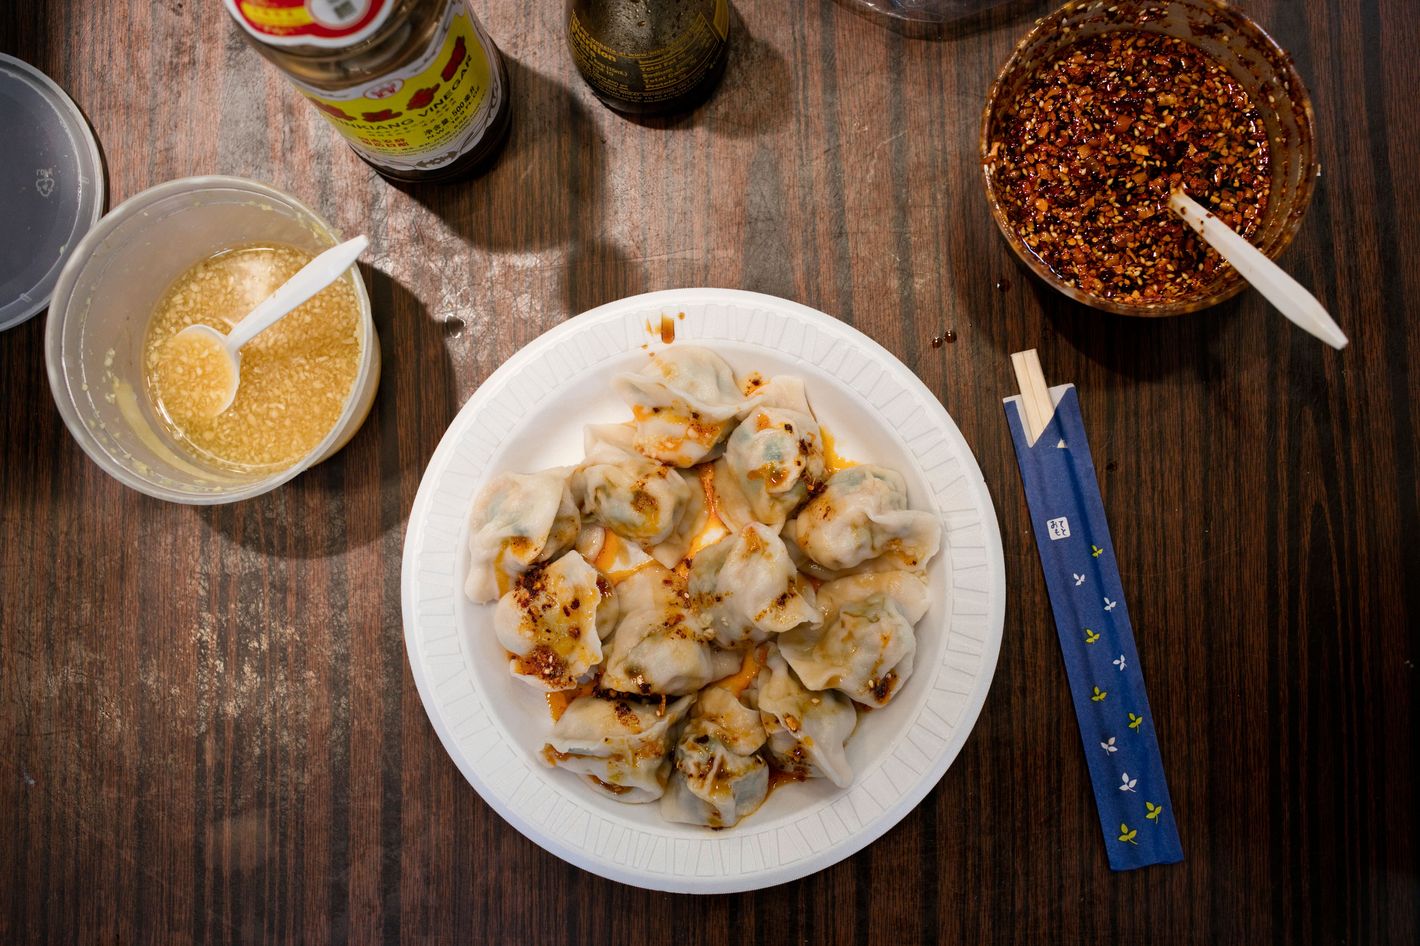 Move Aside Trader Joe's, There's a New Soup Dumpling Taking Over